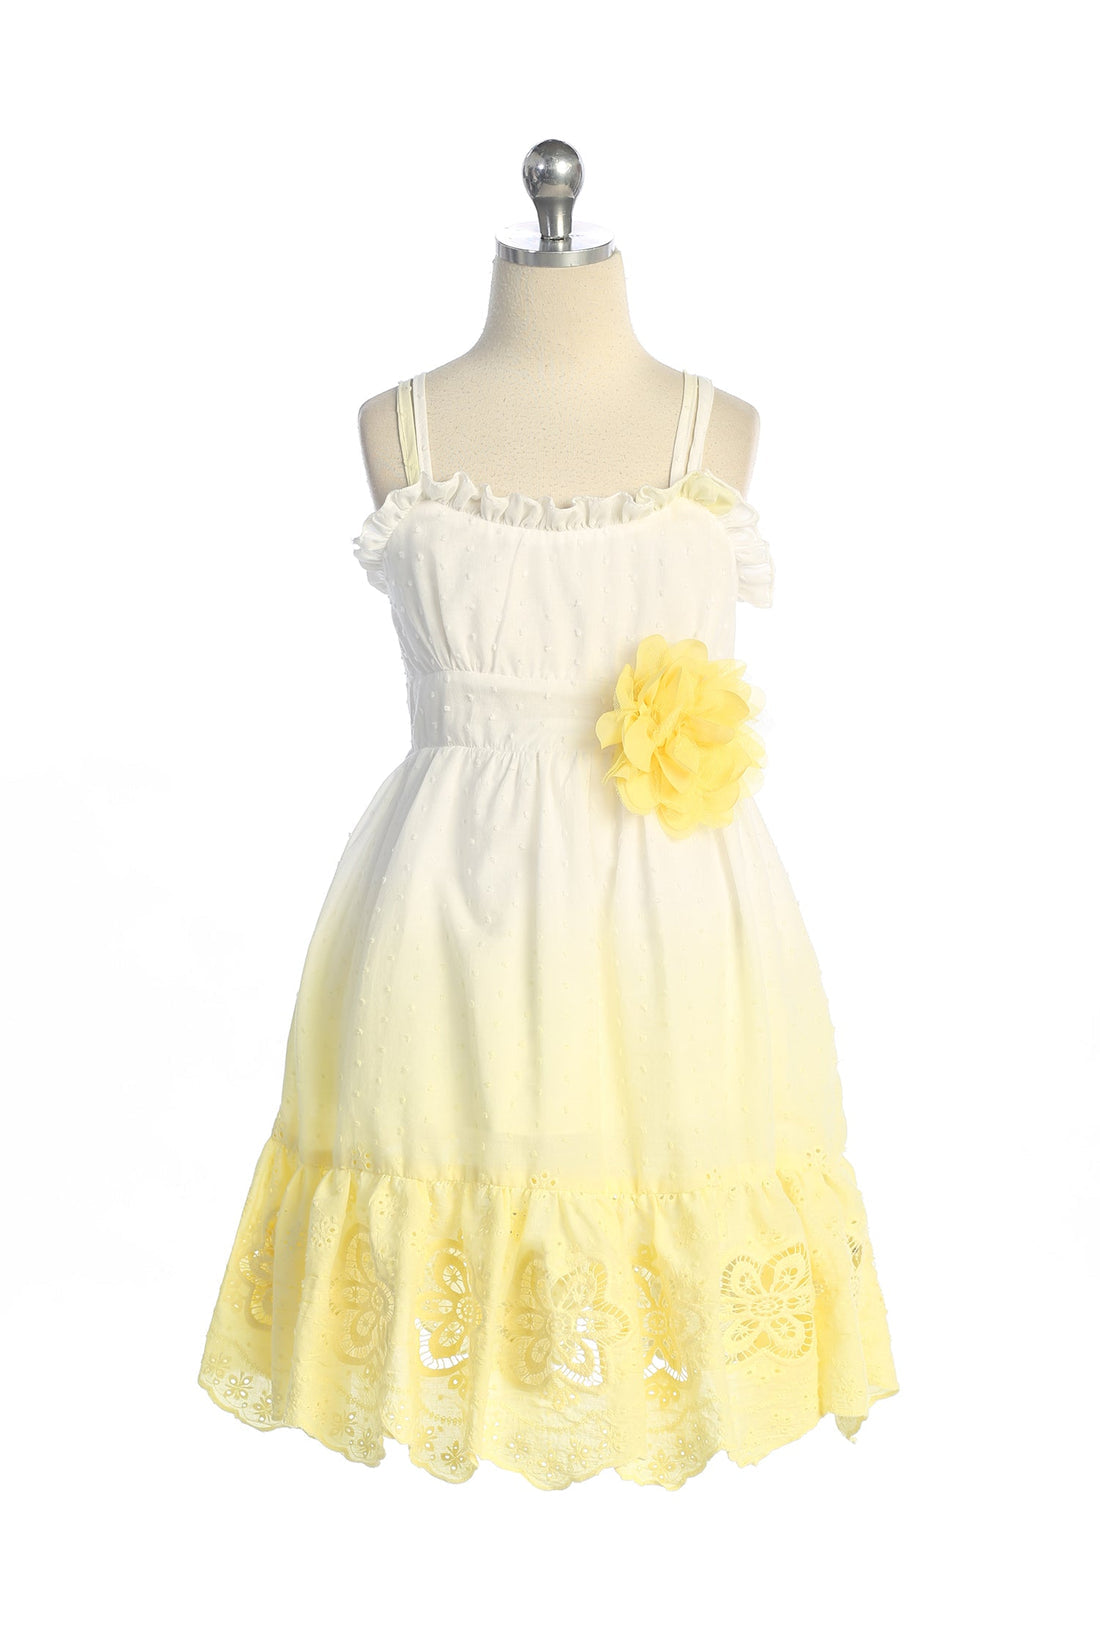 Girl Party Ruffle Ombre Cotton Dress by AS536A Kids Dream - Girl Formal Dresses